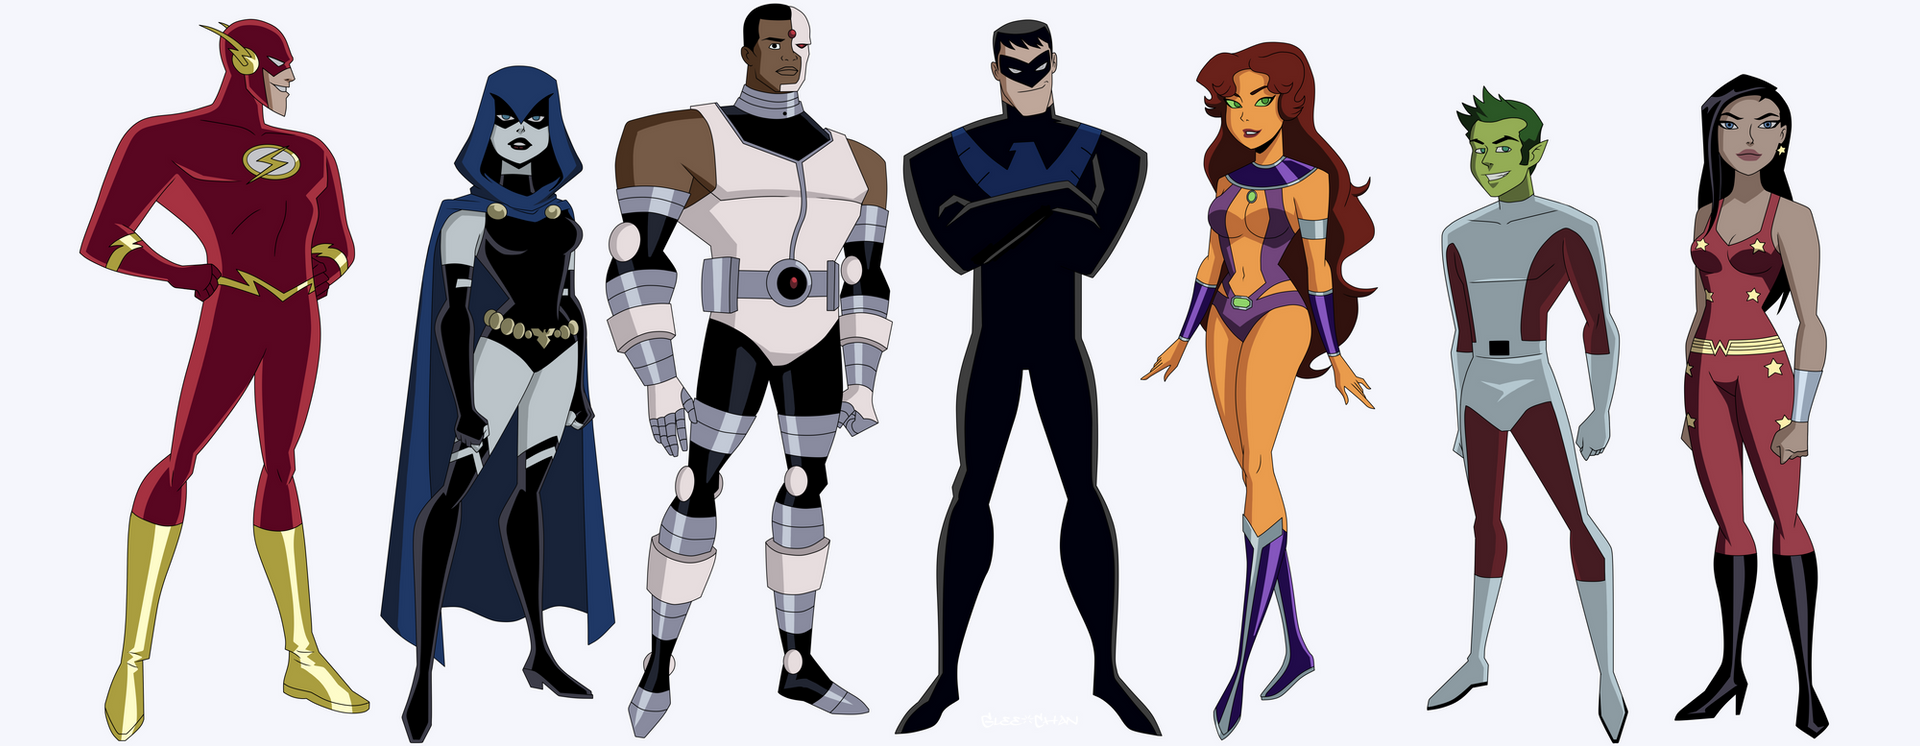 Teen Titans Picture by glee-chan